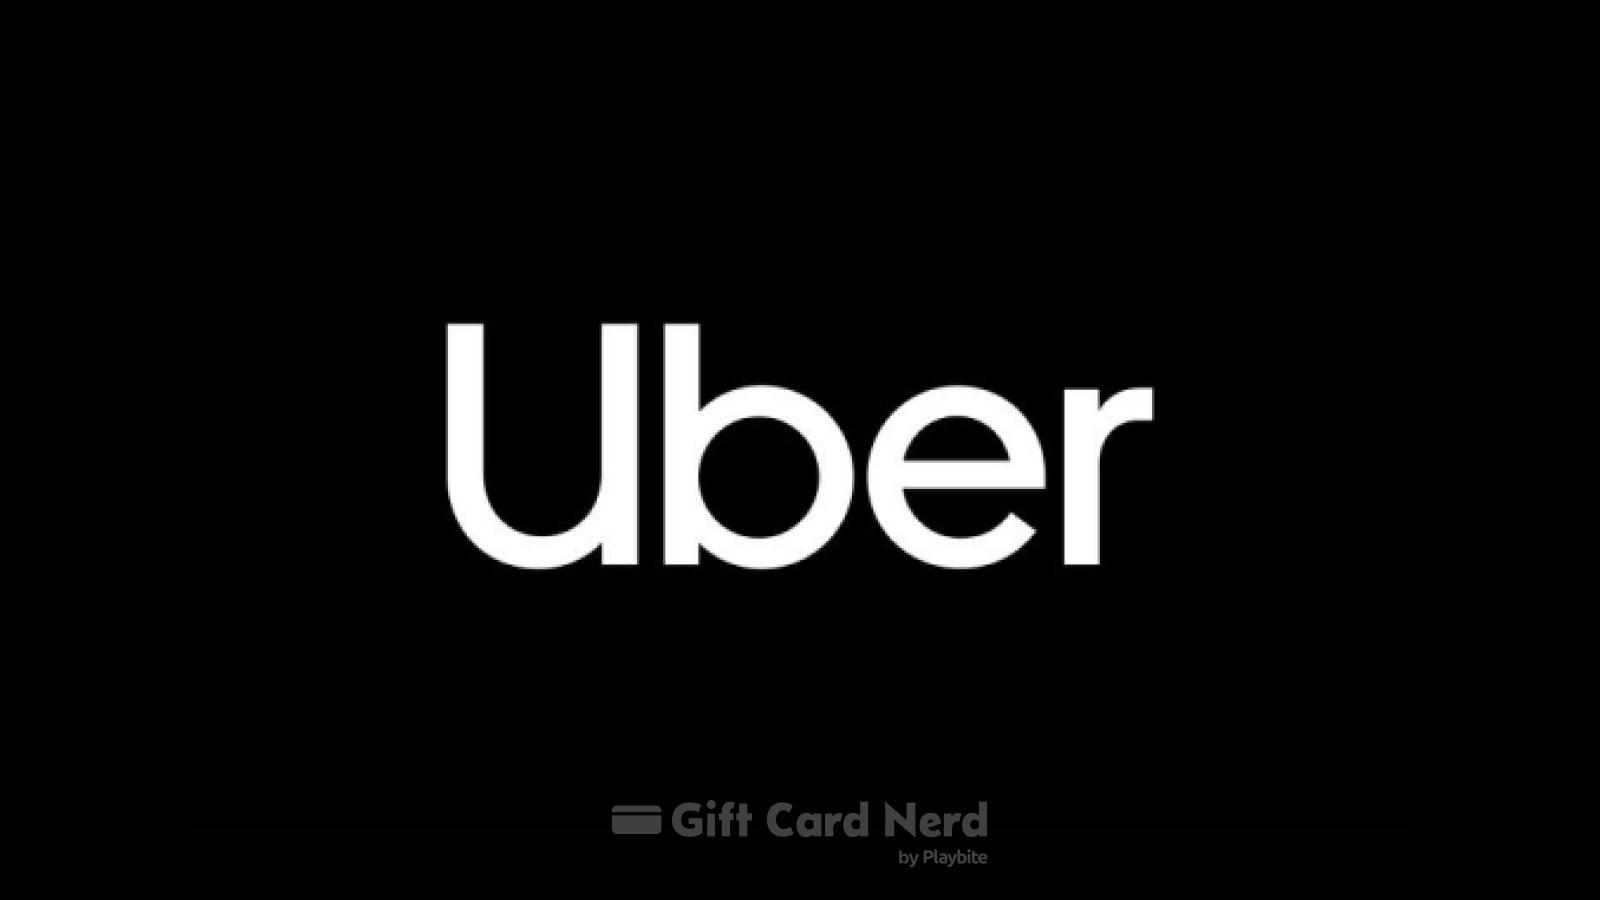 Does Amazon Sell Uber Gift Cards?